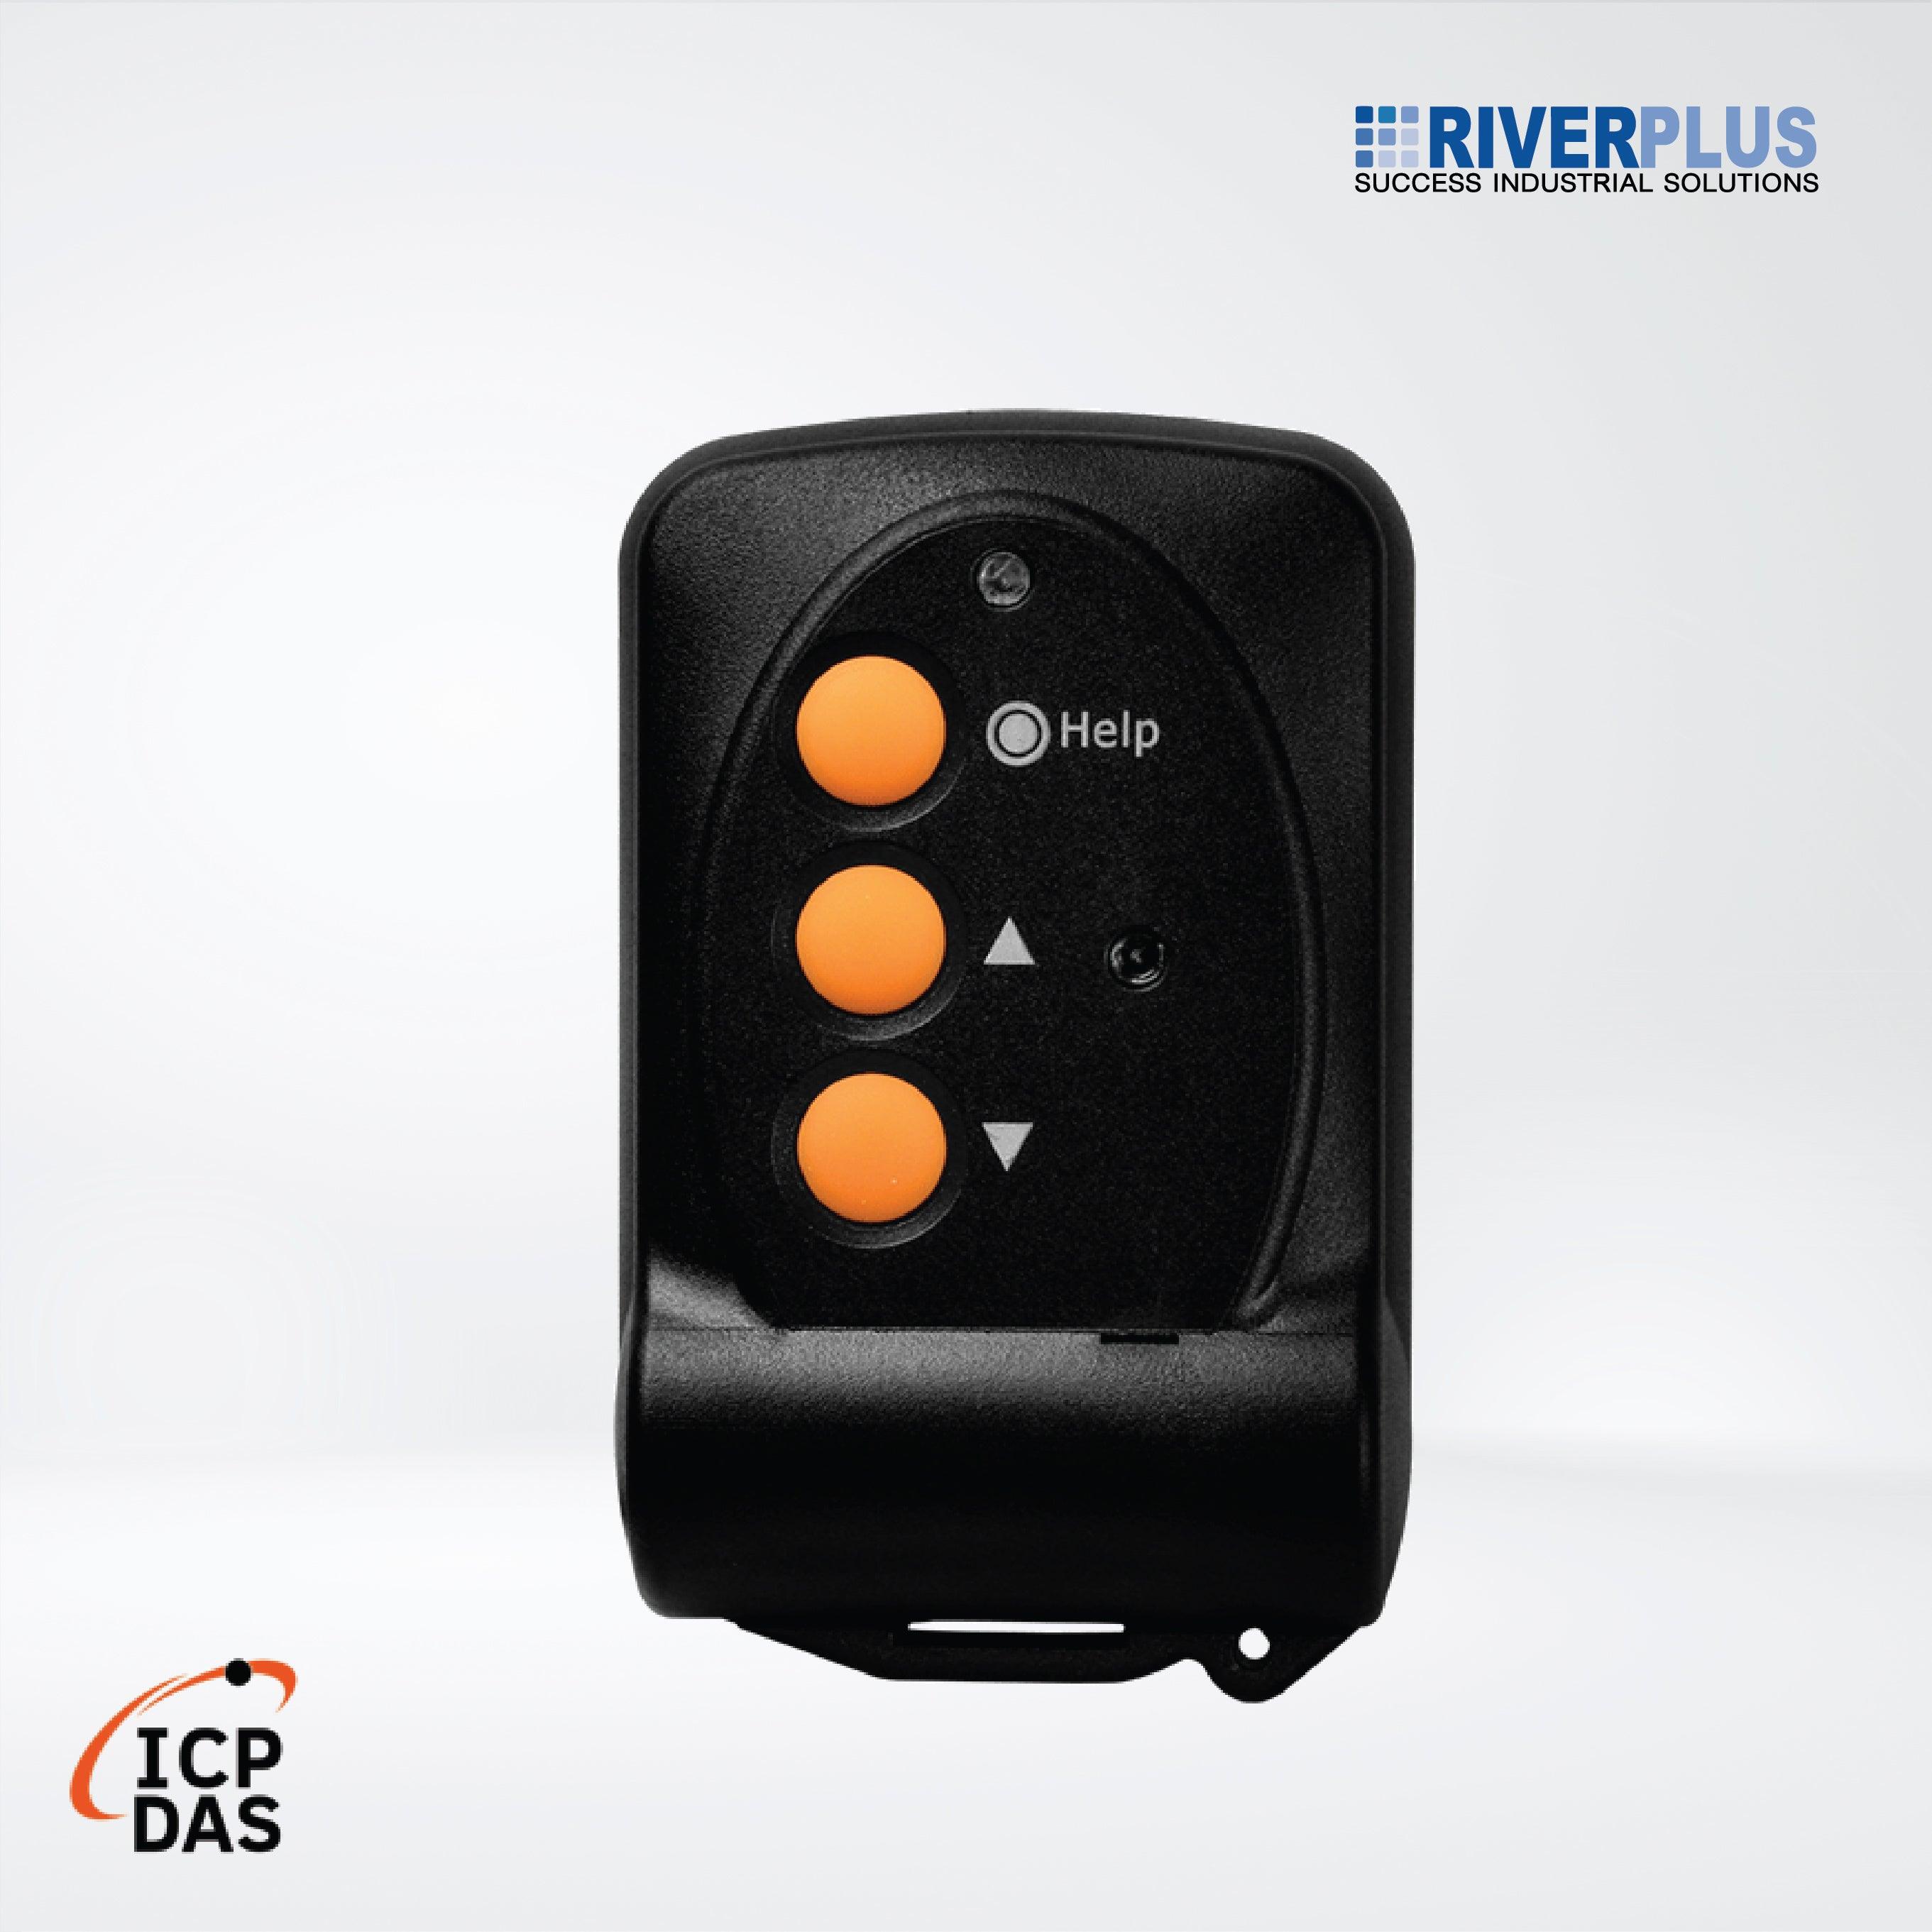 WLS-T01 Battery Standard Type Wireless Locating System Transmitter with Help Button (100 m) (Asia Only) - Riverplus